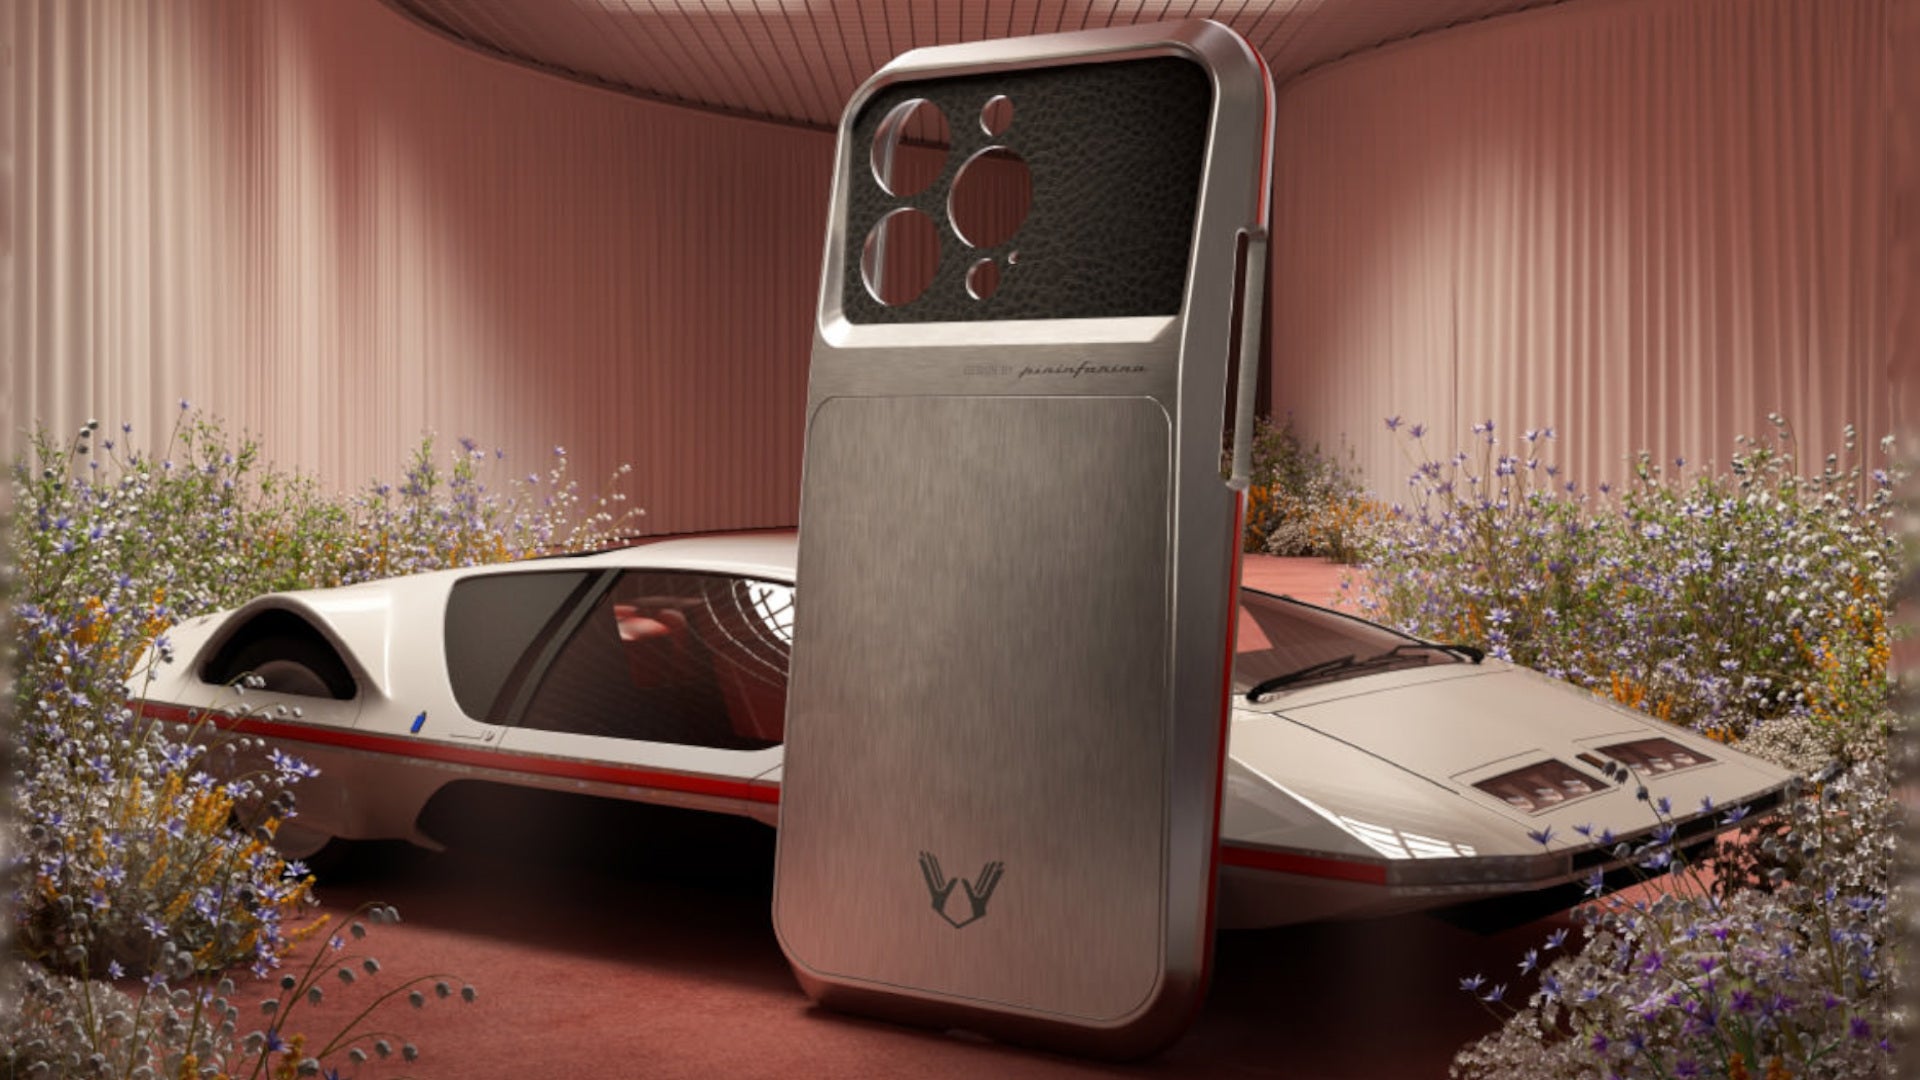 This $10,000 iPhone Case Is Styled by Pininfarina